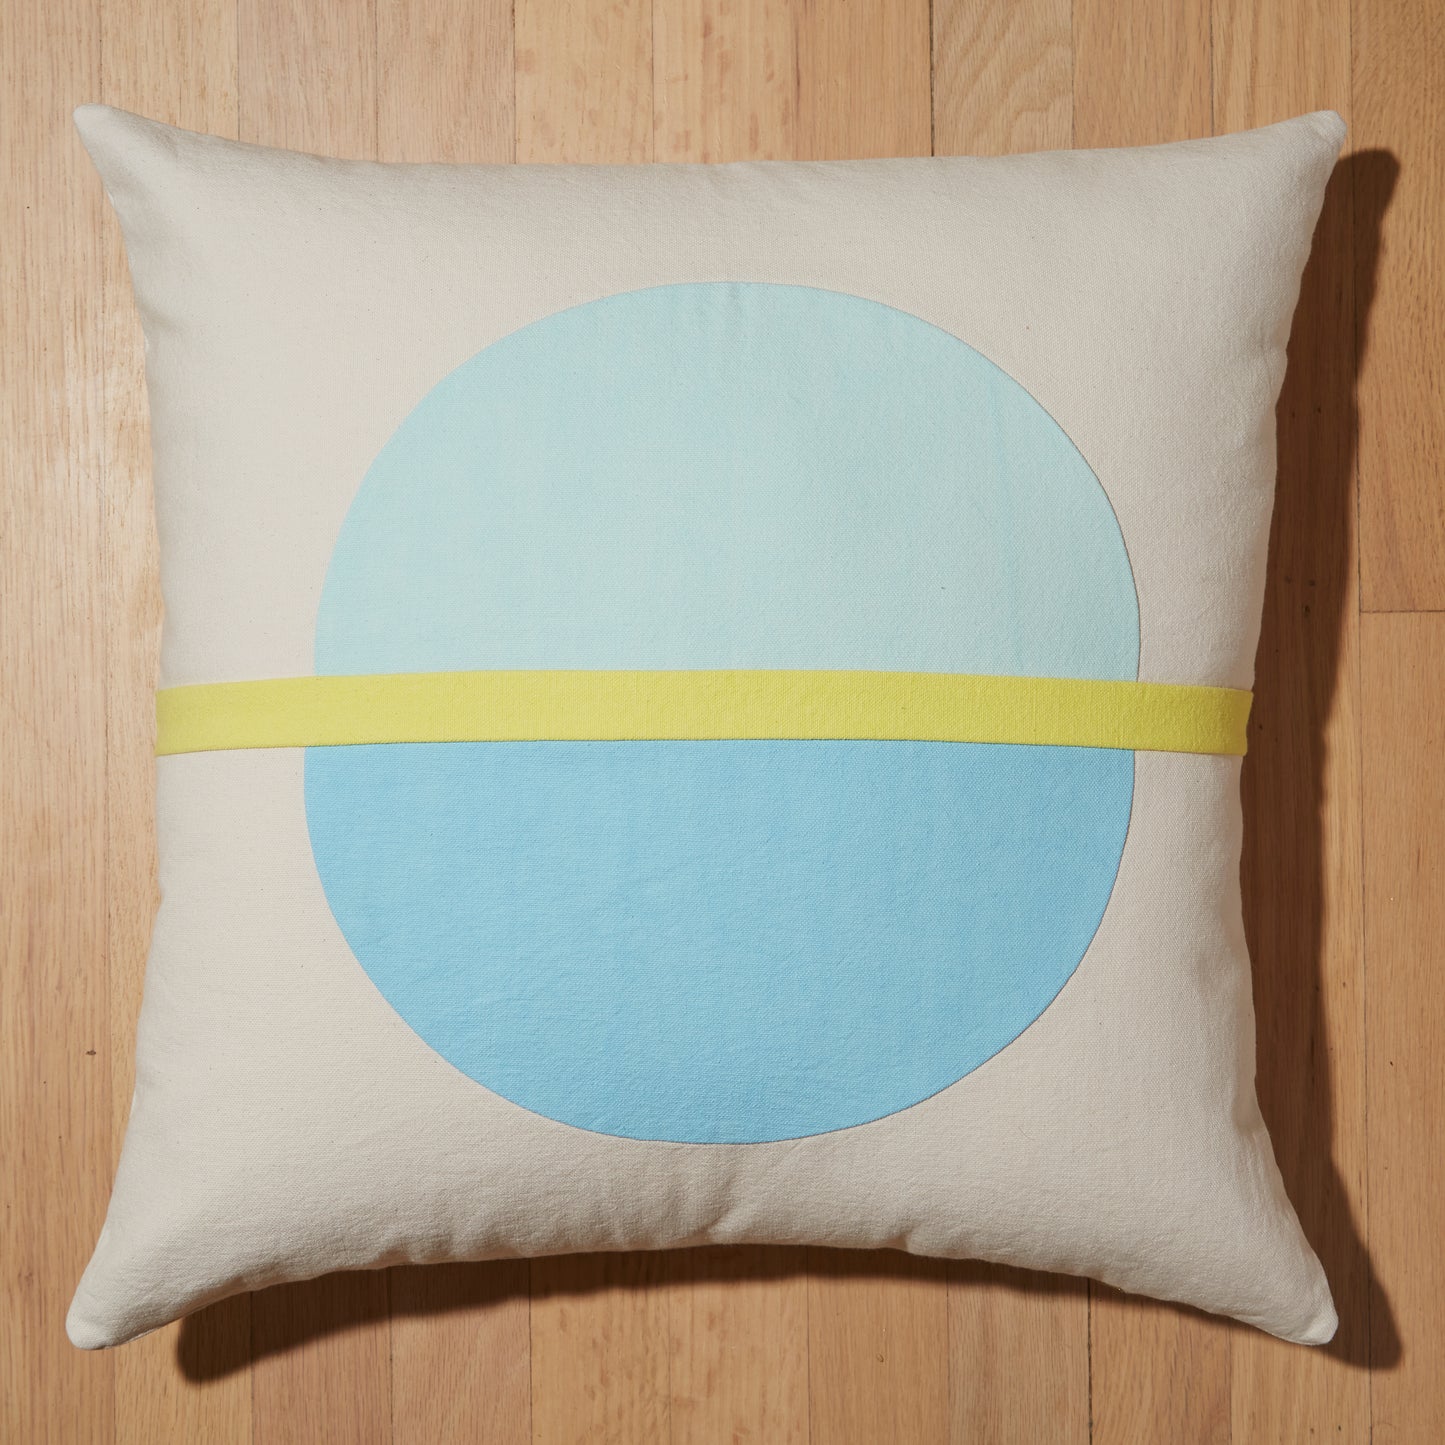 Re:Canvas Arco High Square Pillow